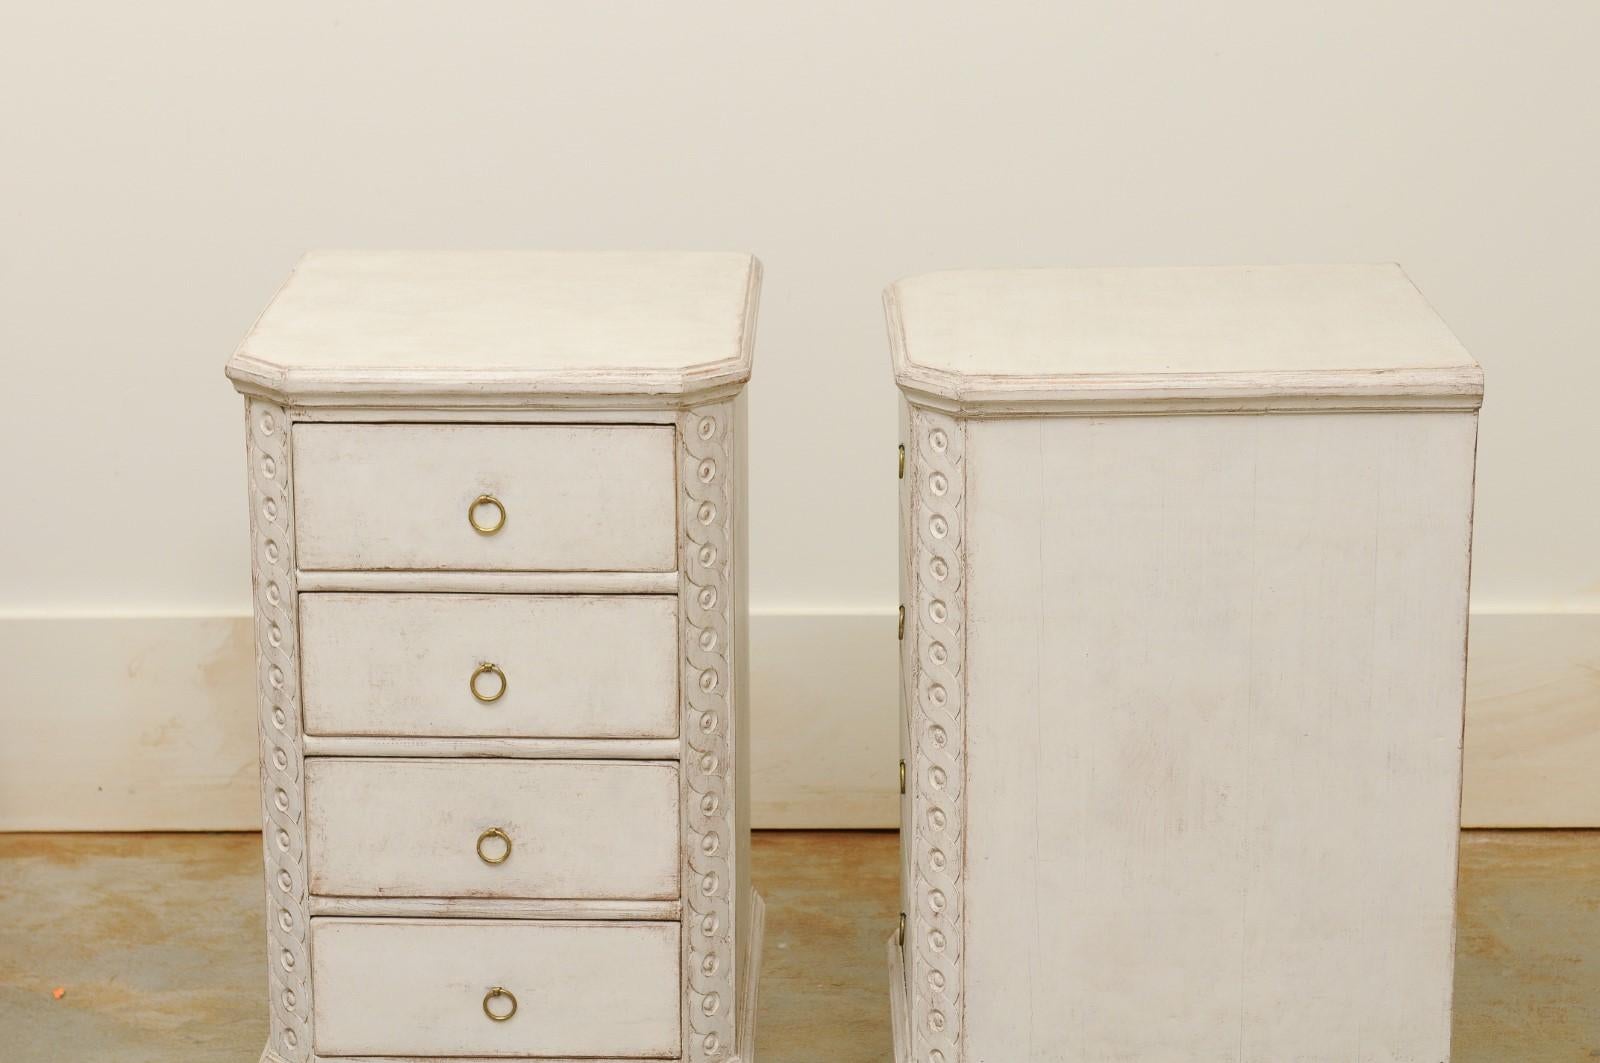 Pair of Swedish Neoclassical Style Painted Nightstand Tables with Guilloches 10